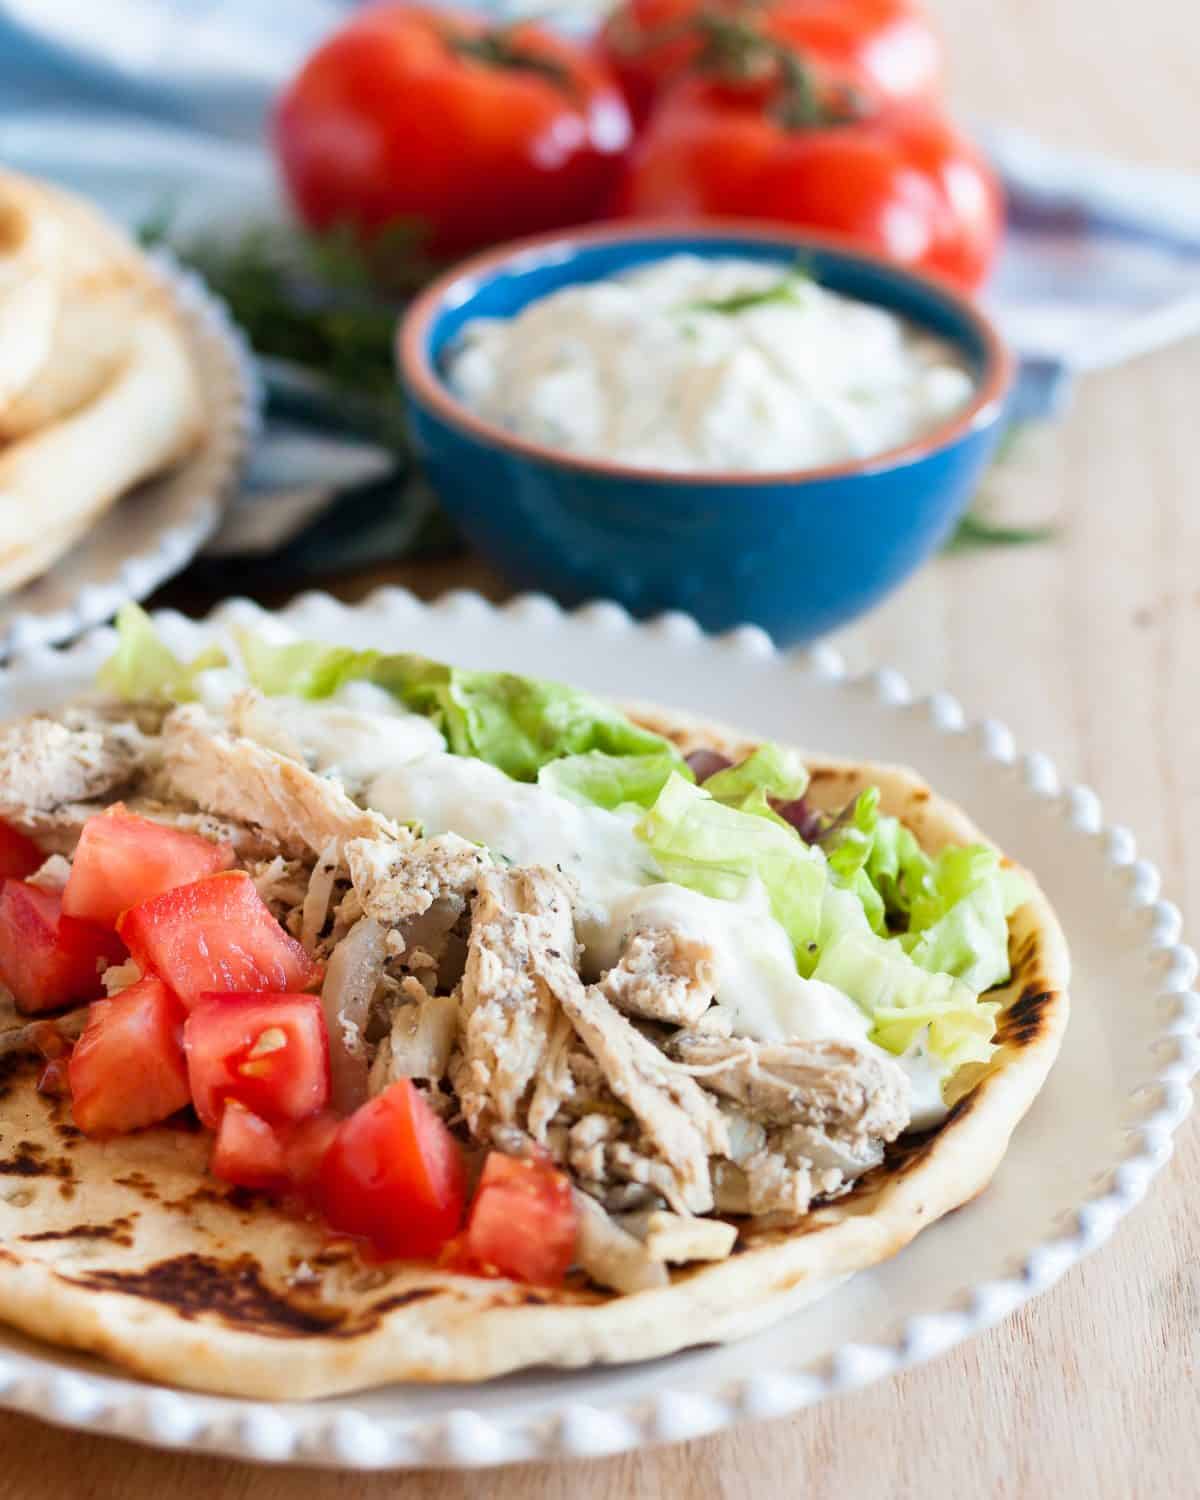 When time is short, but you need an easily customized healthy meal, make some slow cooker chicken gyros! Recipe includes instructions for the instant pot too if you're short on time! * Recipe on goodiegodmother.com